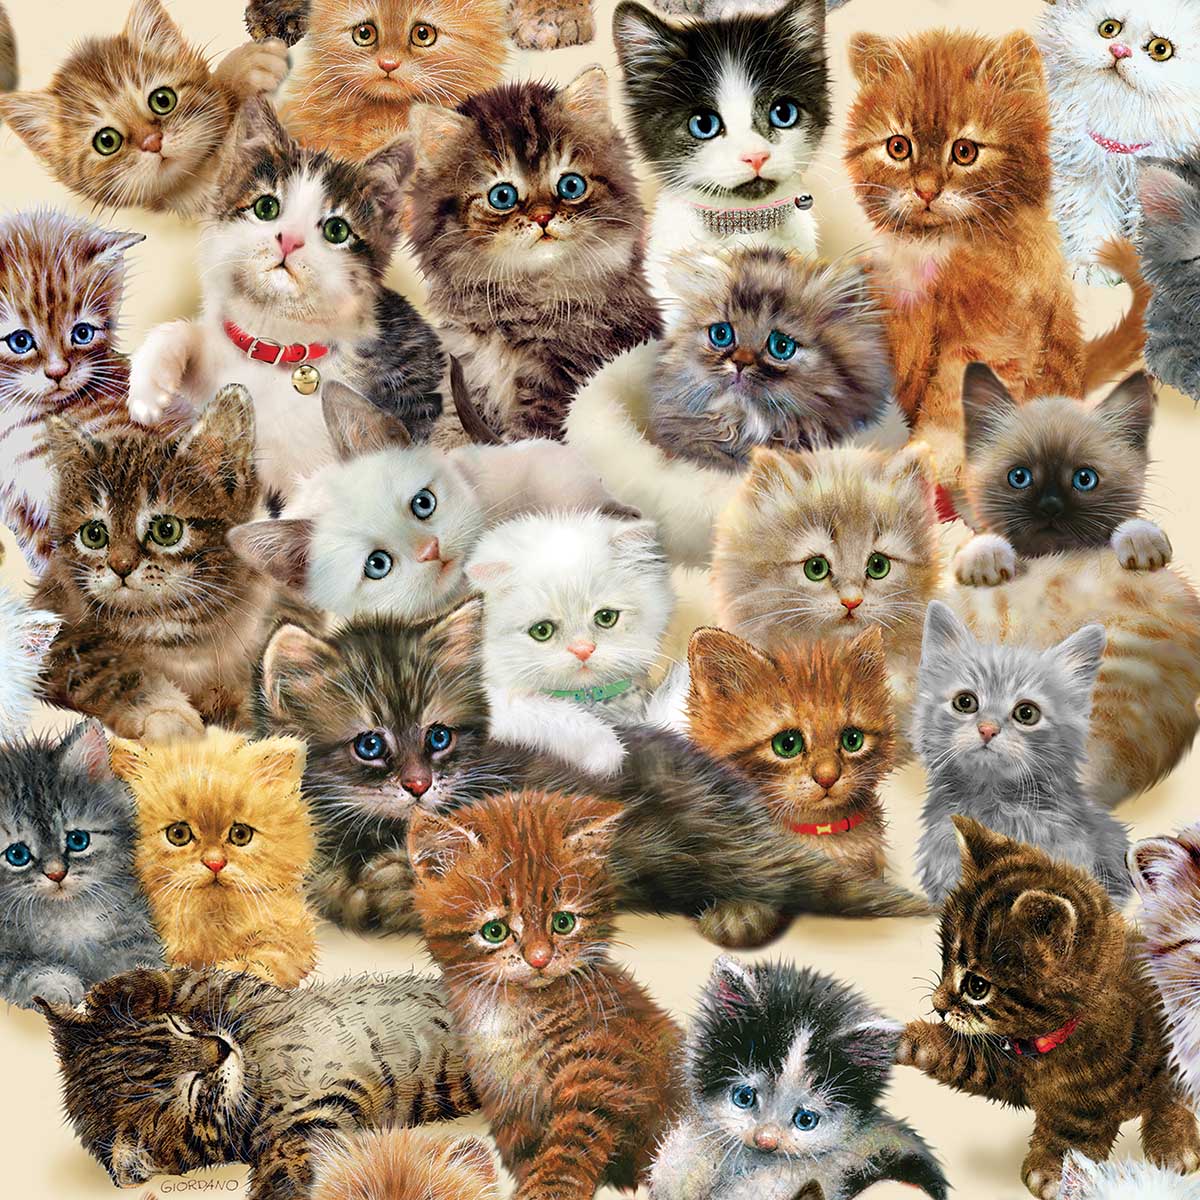 SunsOut Puzzle - #37182 Kittens for the Taking - 500pc Jigsaw Puzzle 